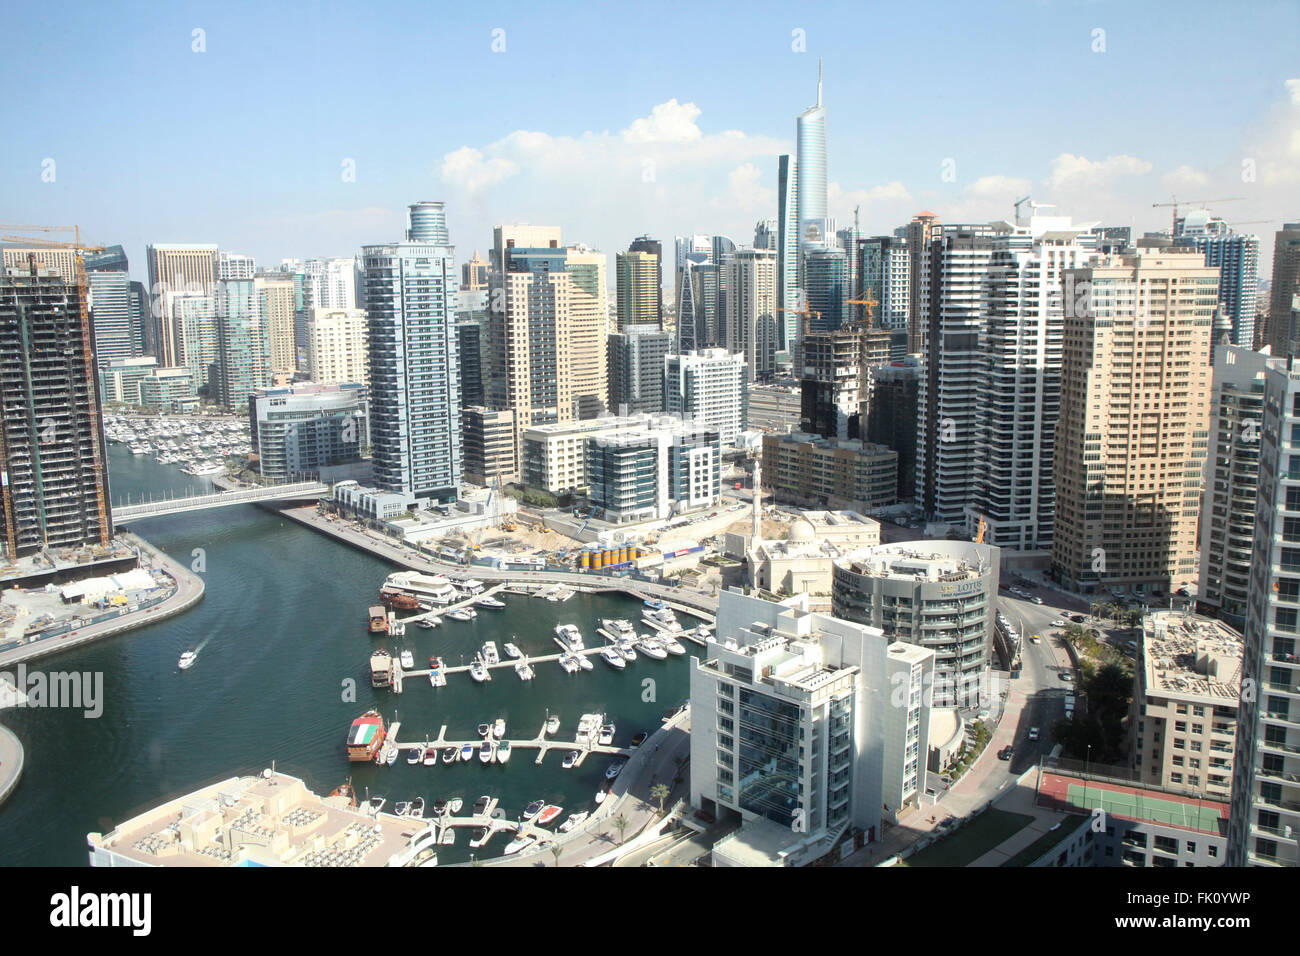 The view of the Dubai Marina skyline in Dubai from the top of a hotel in the area. in 2006 Dubai marina area was just sands Stock Photo